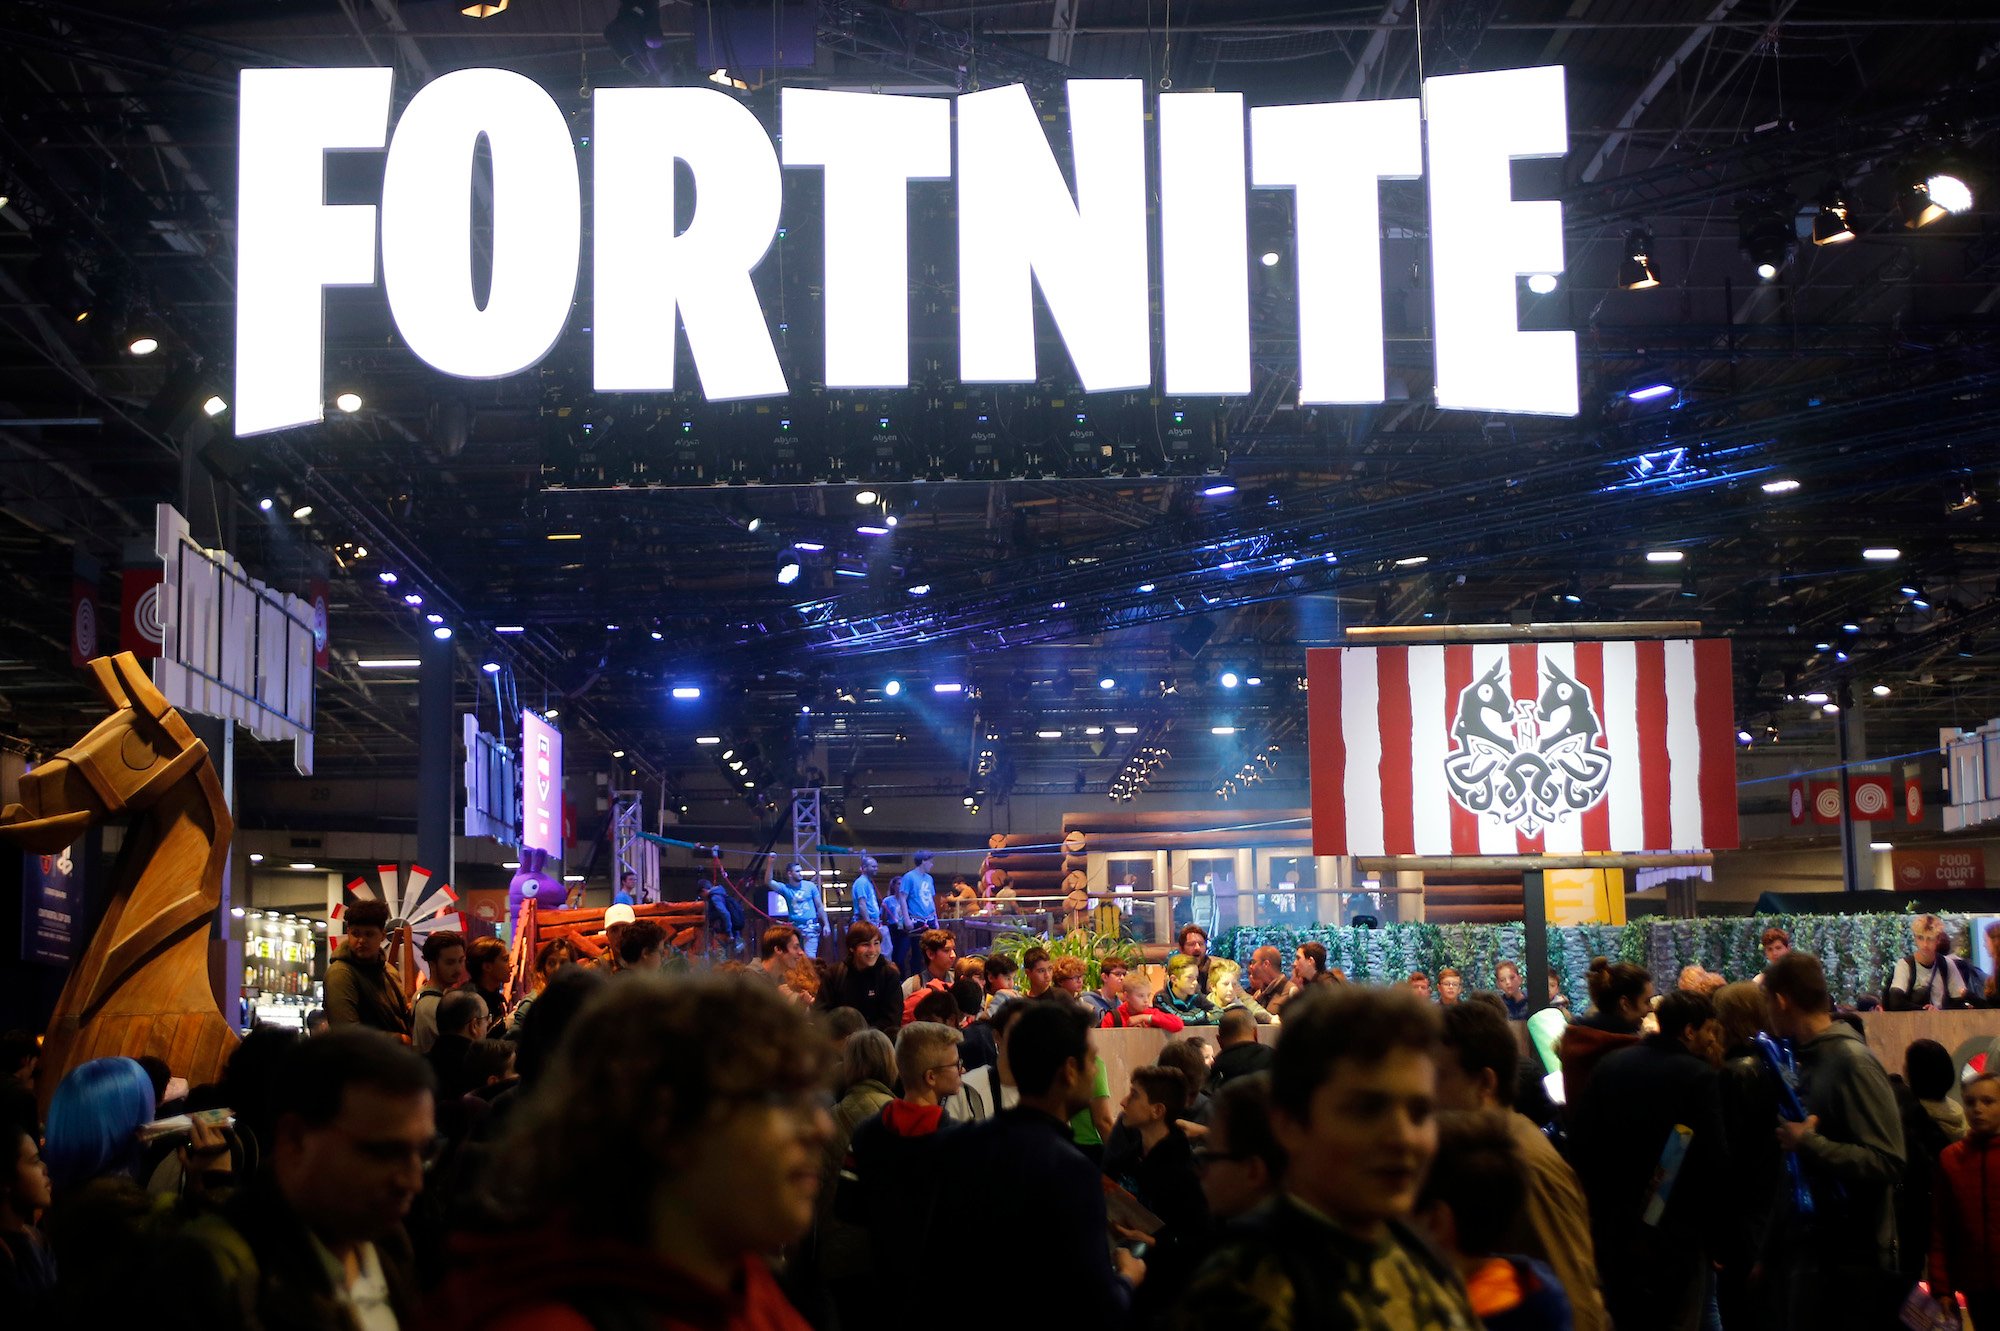 Fortnite lighted logo above a crowd of people in a convention center